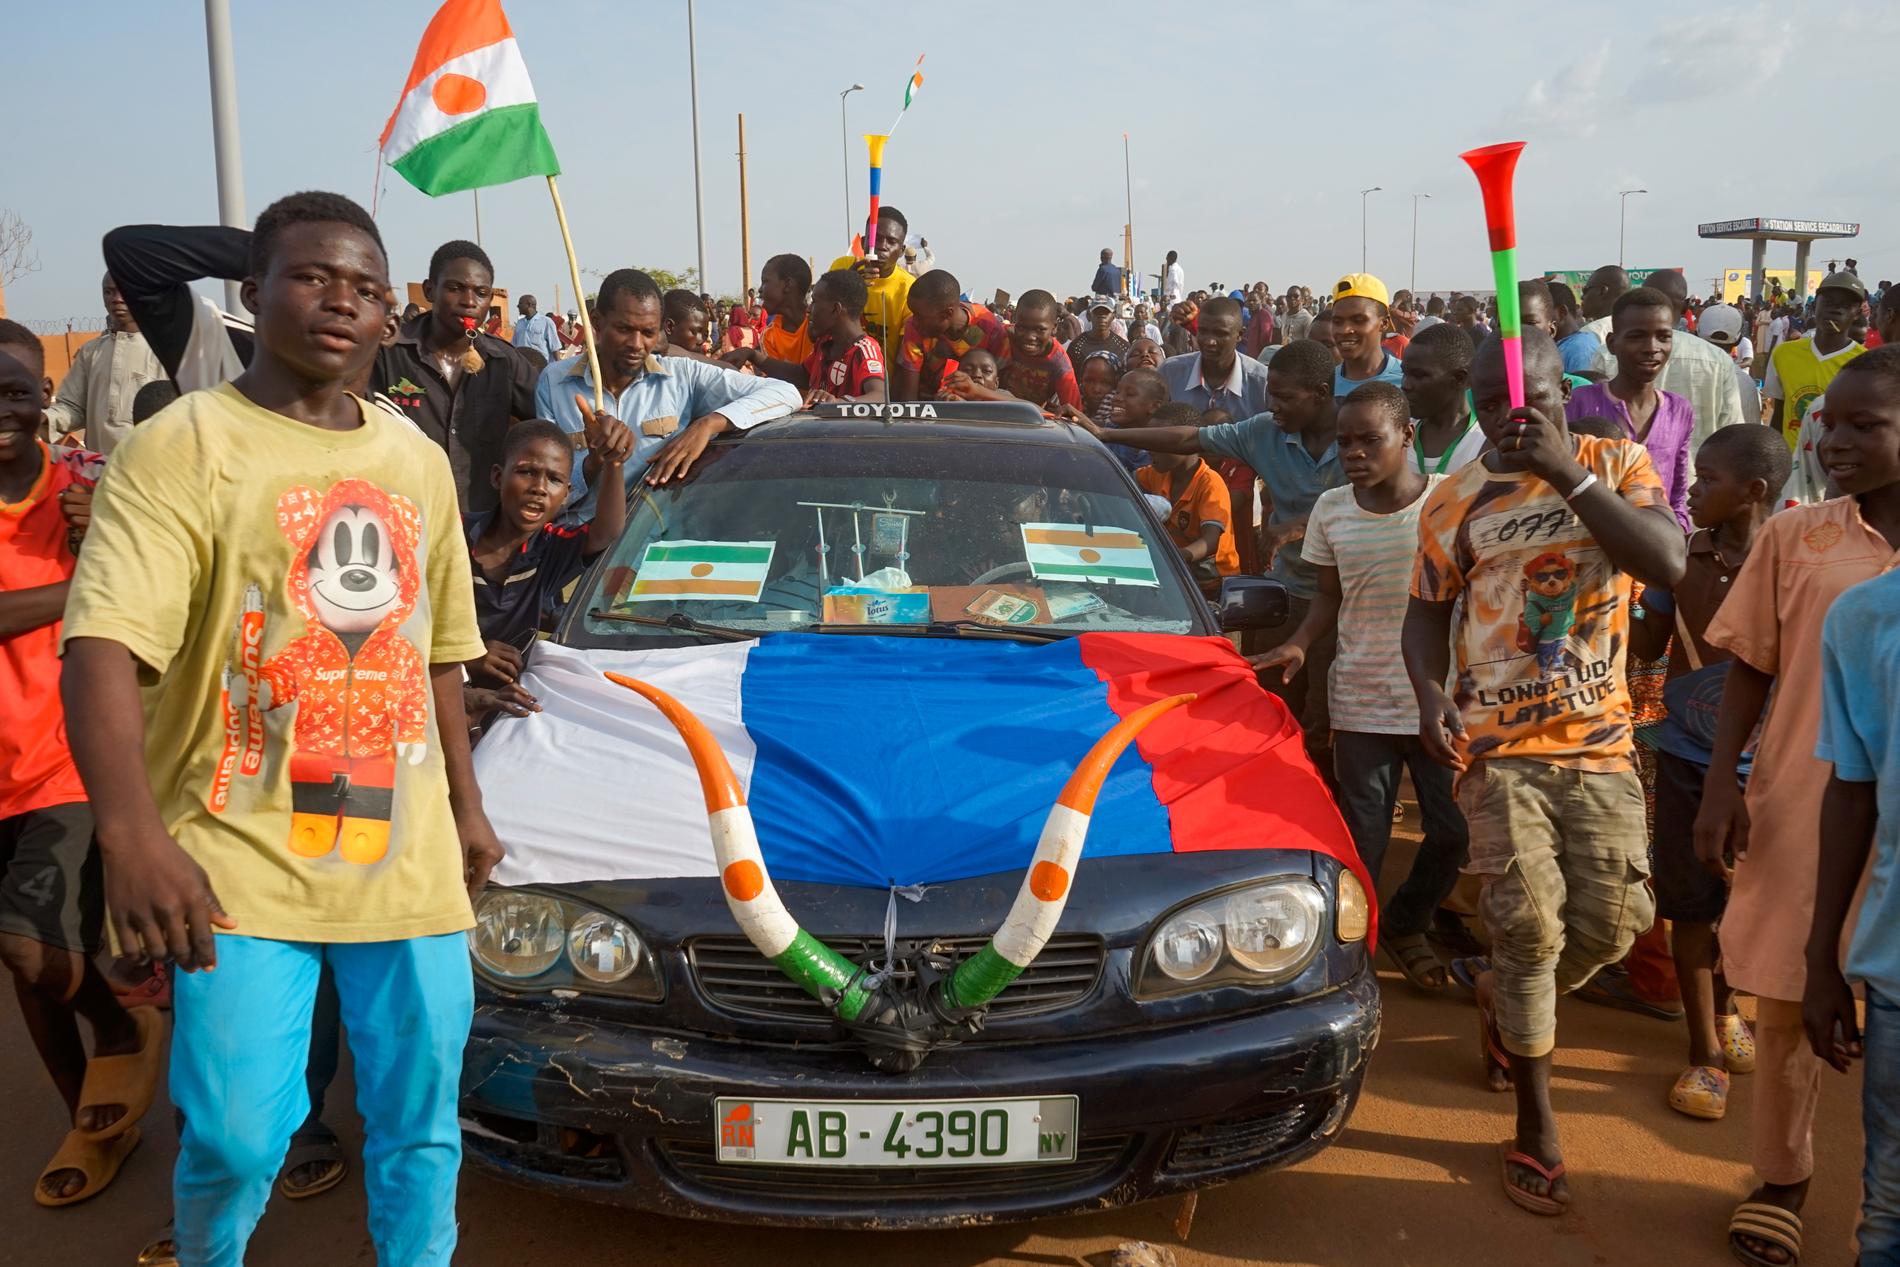 Impact: Russian influence campaigns appear to be successful in West Africa.  Here during a demonstration in Niger, where many are disappointed by the lack of aid from Western countries.